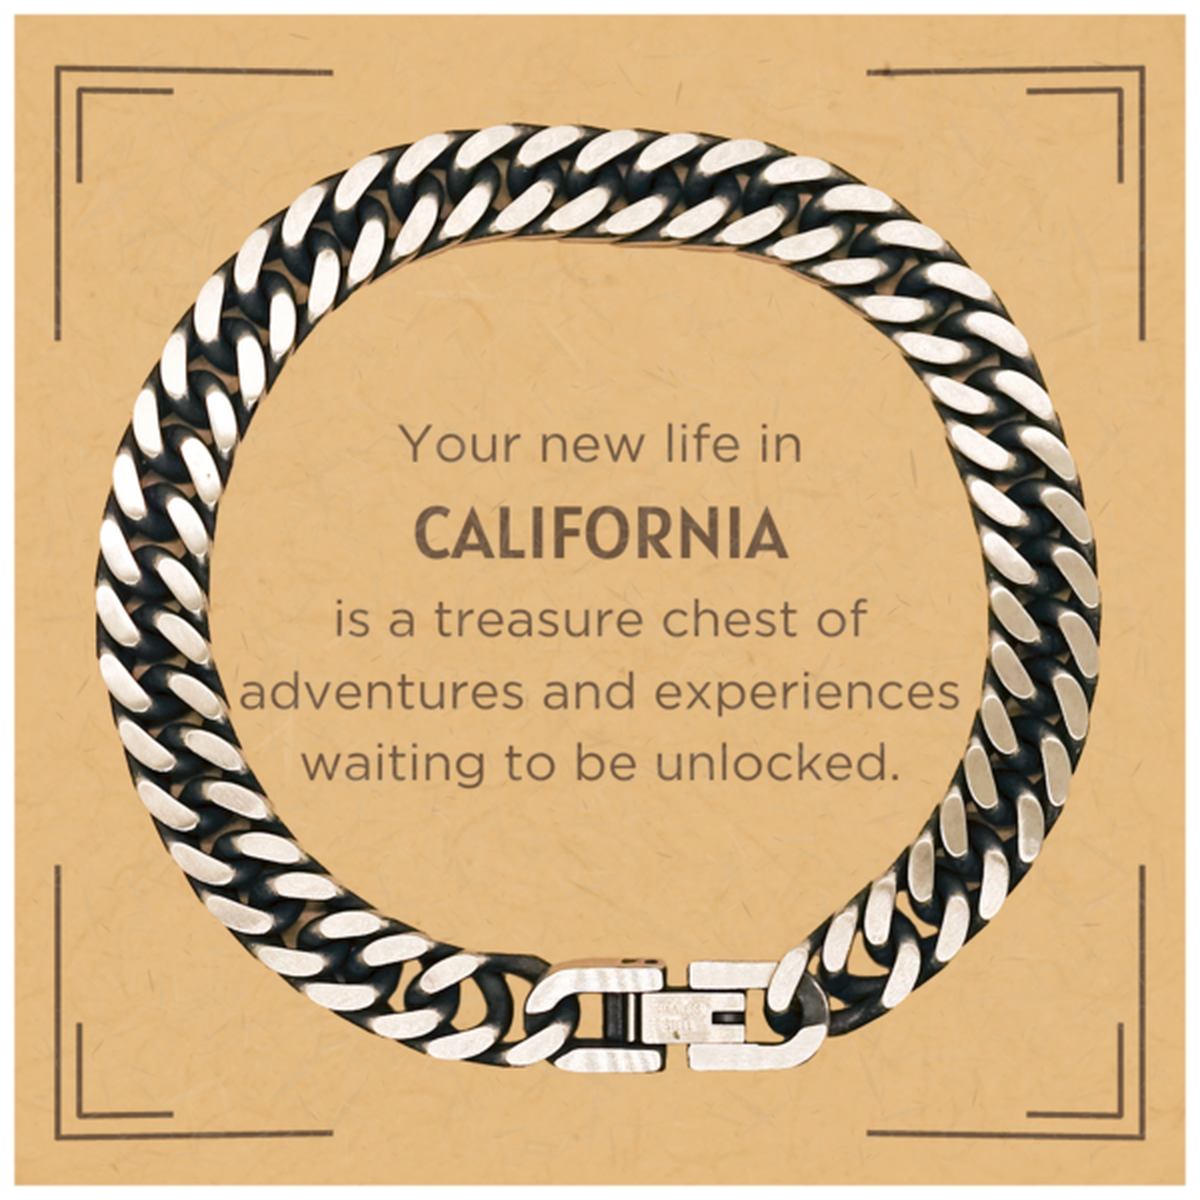 Moving to California Gifts, Your new life in California, Long Distance California Christmas Cuban Link Chain Bracelet For Men, Women, Friends, Coworkers